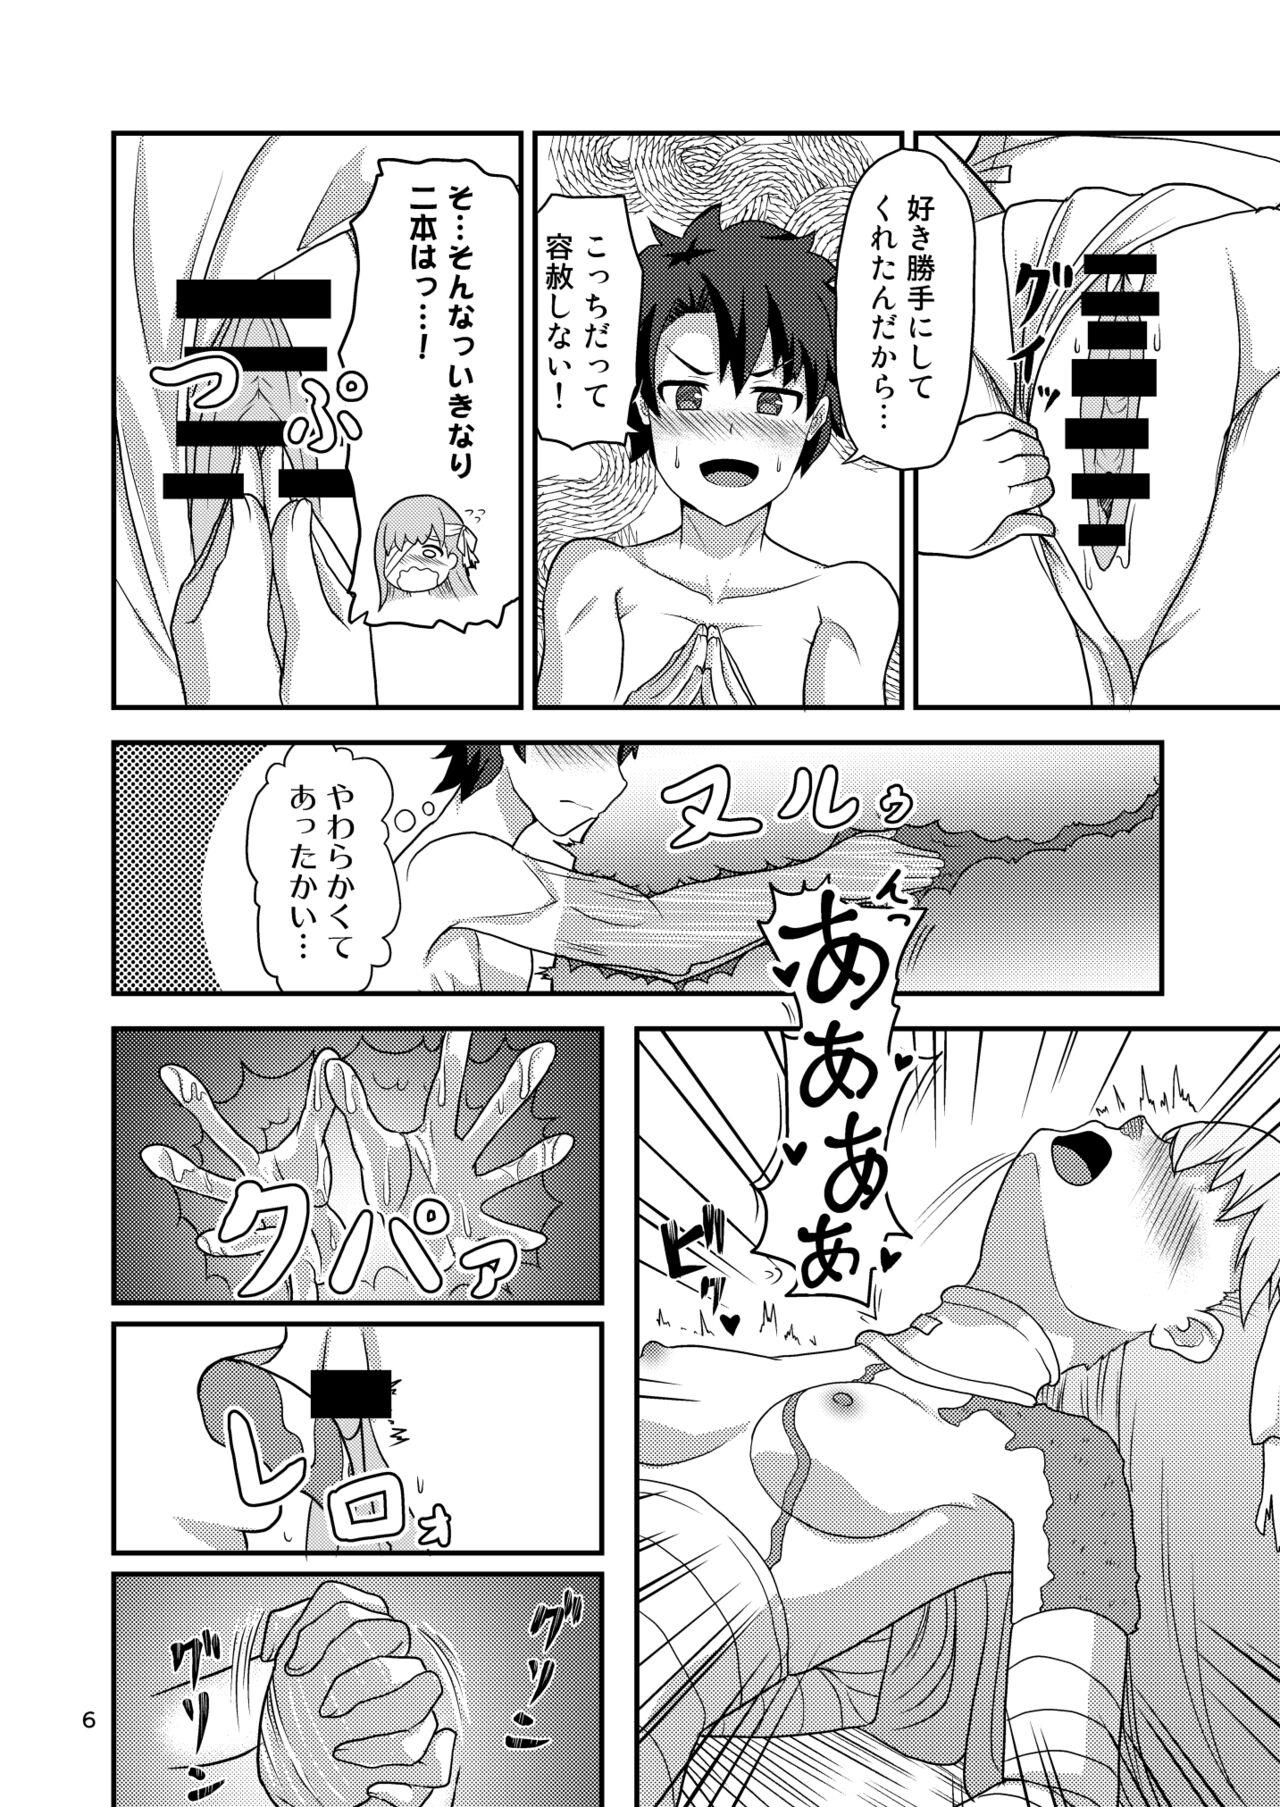 Ametuer Porn Hな私をゆるしてください - Fate grand order Toy - Page 7